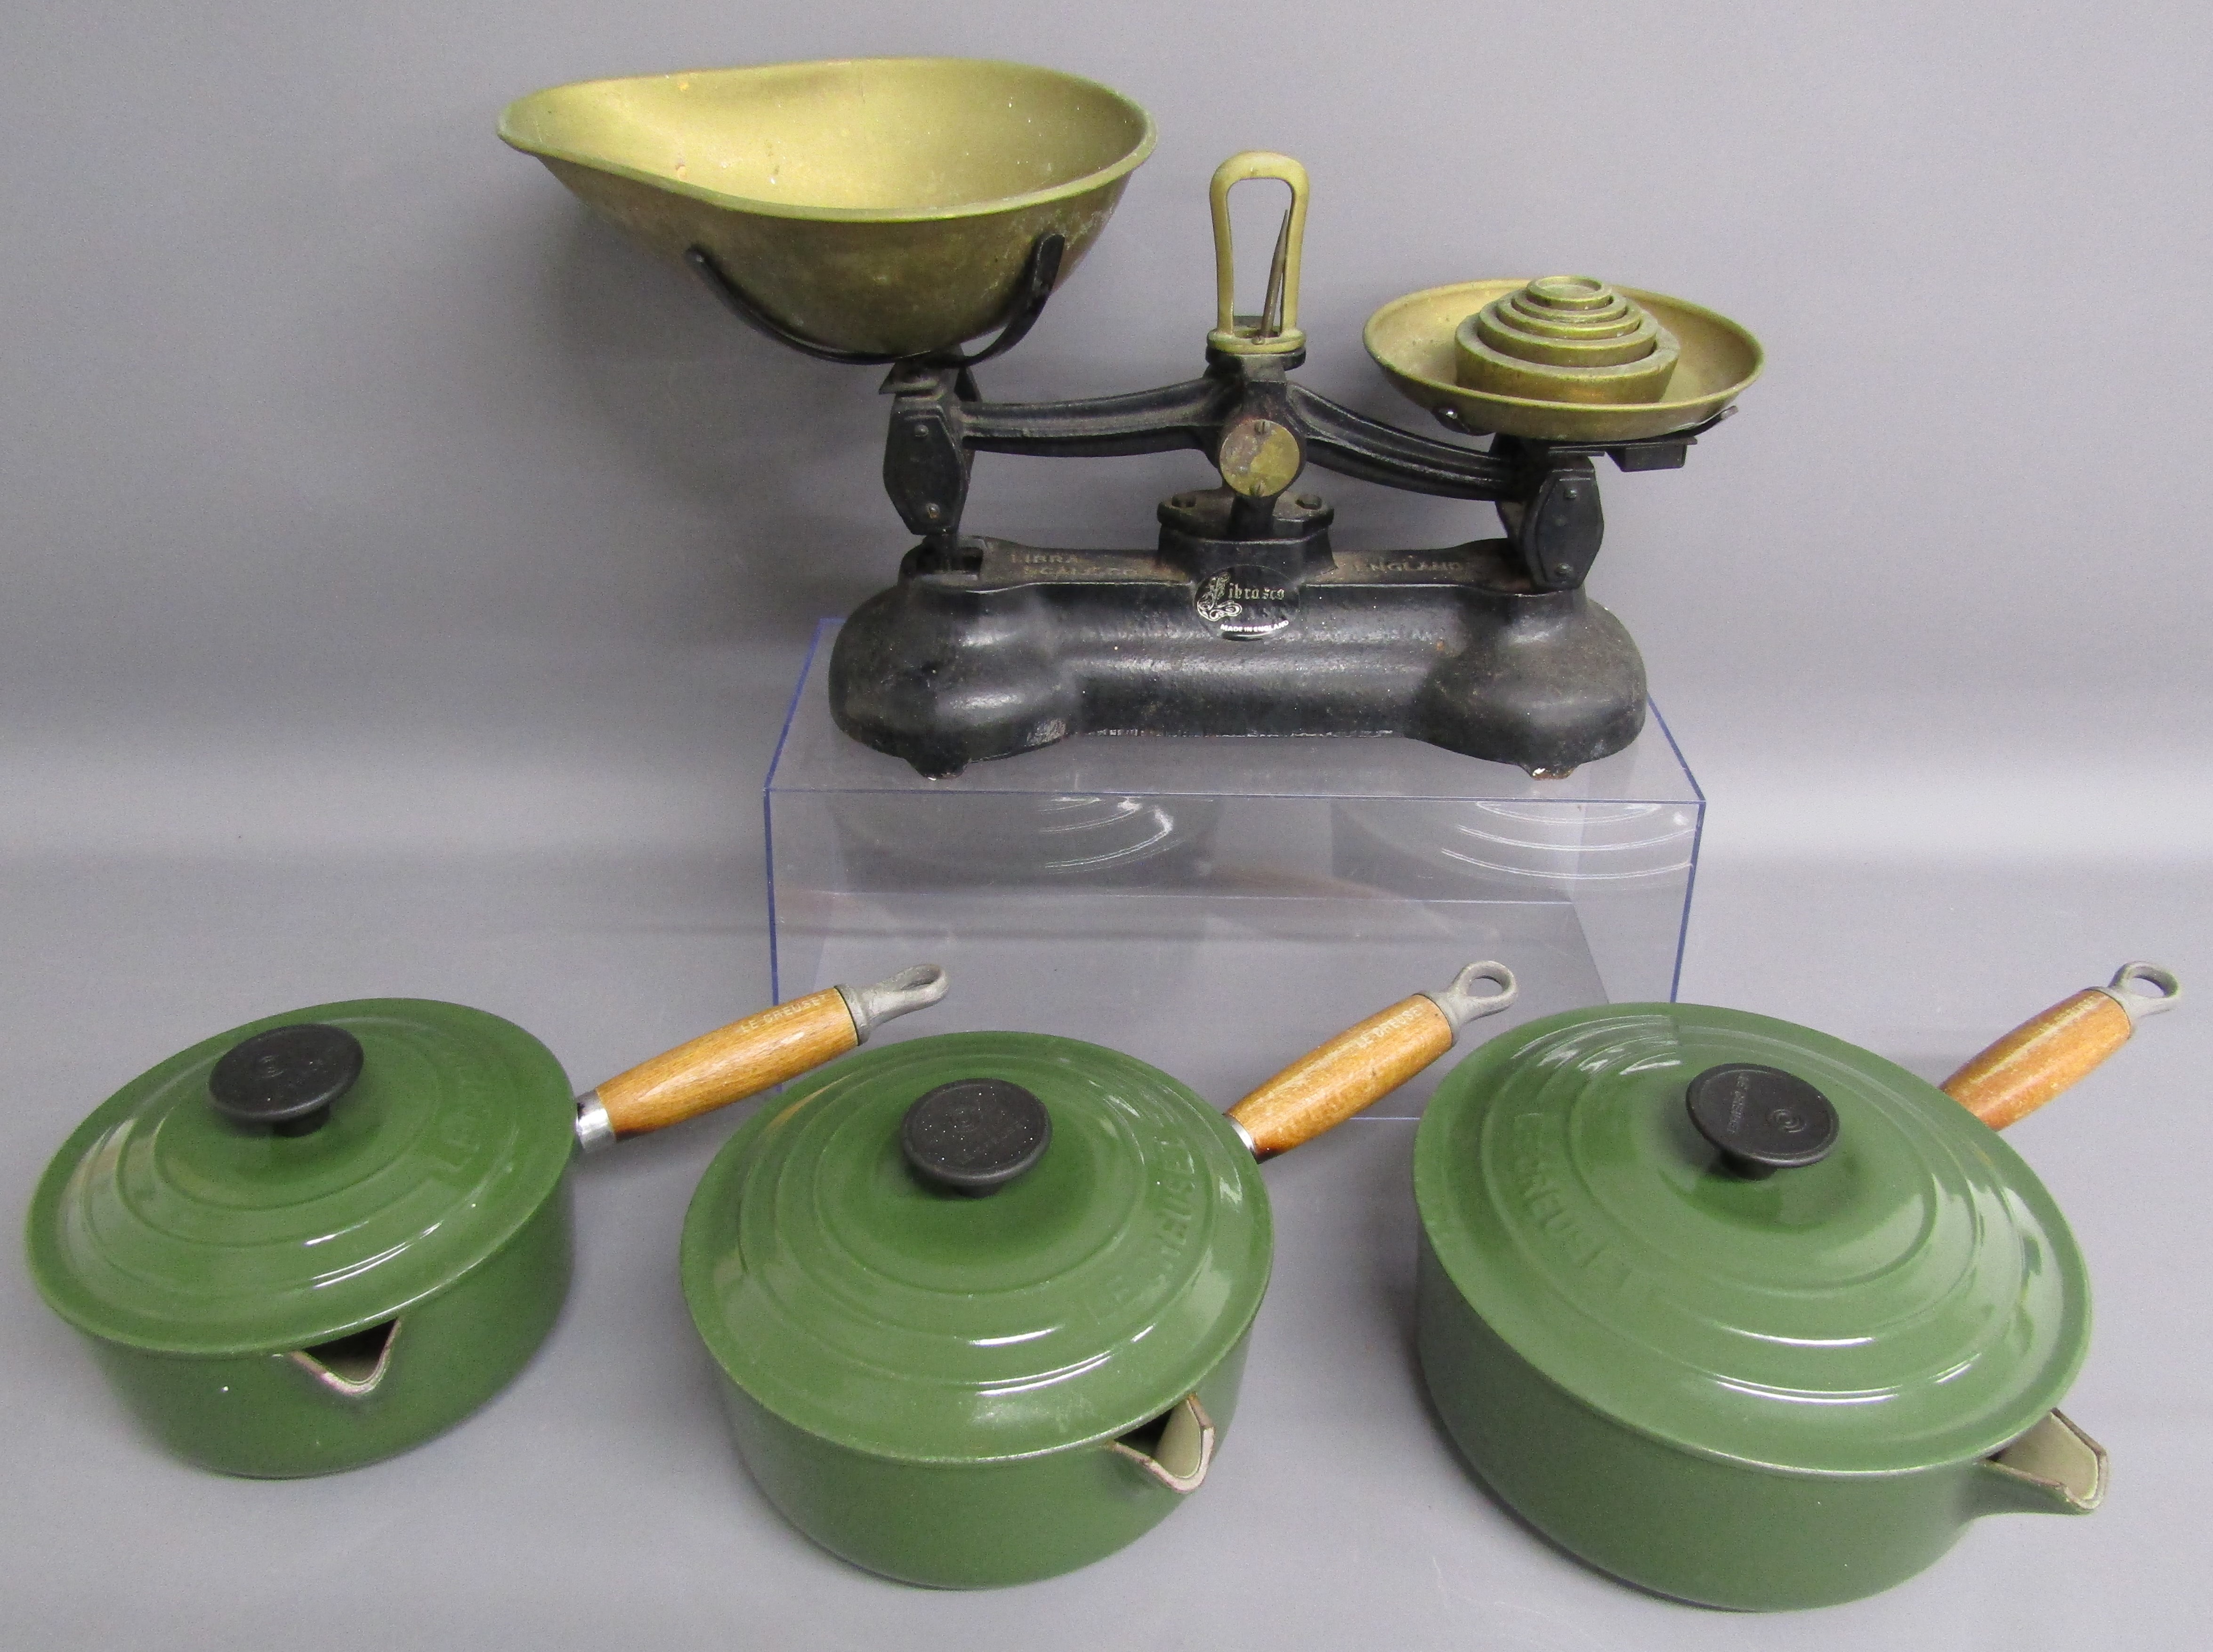 Libra Scale Co scales with weights and 3 green Le Creuset pans with lids and wooden Le Creuset